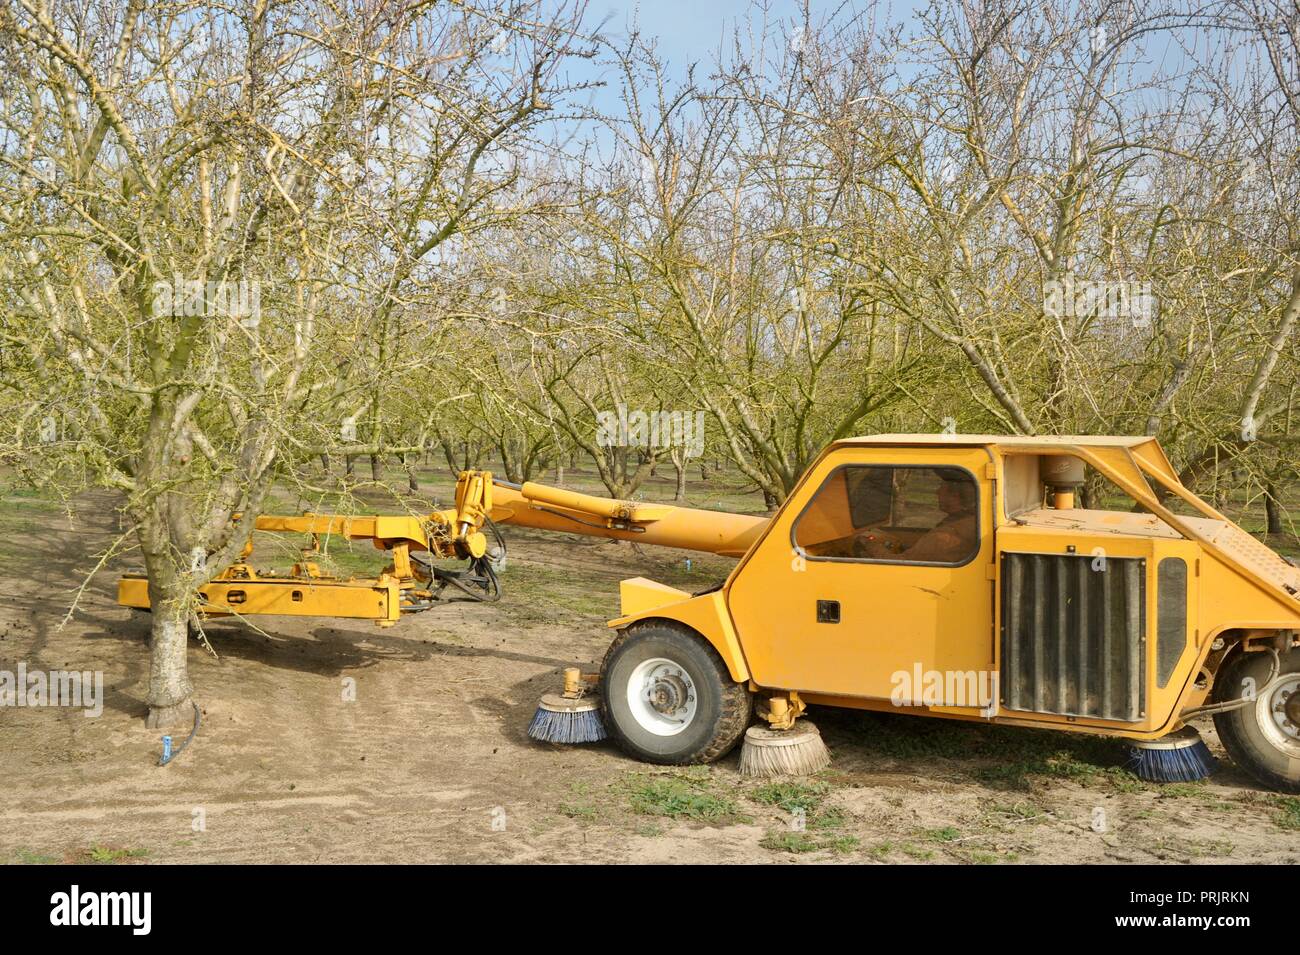 Harvesting almonds for Blue Diamond Cooperative using a large tractor machine that shakes the trees on a farm outside Manteca, California, USA Stock Photo